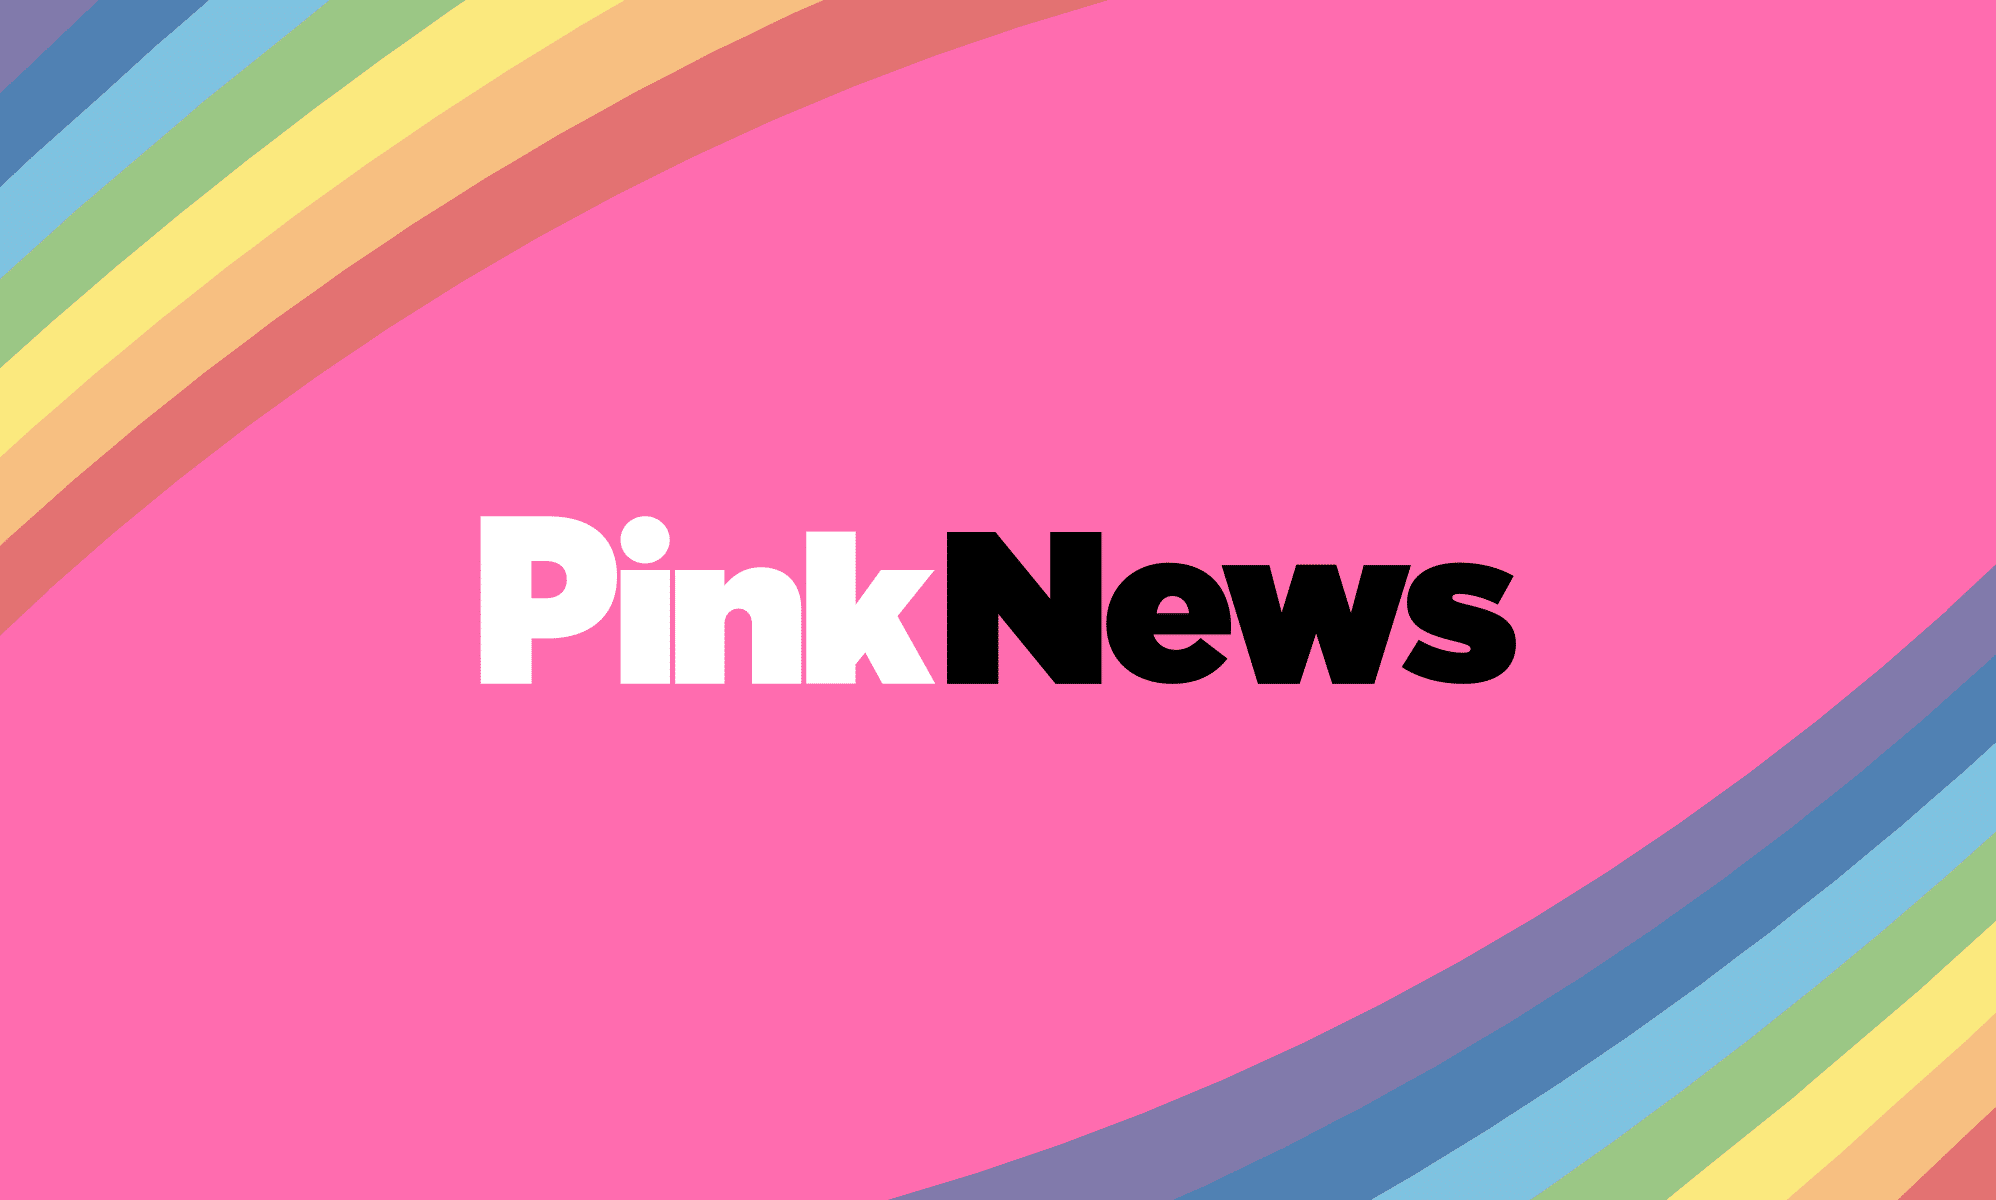 The PinkNews Summer Reception